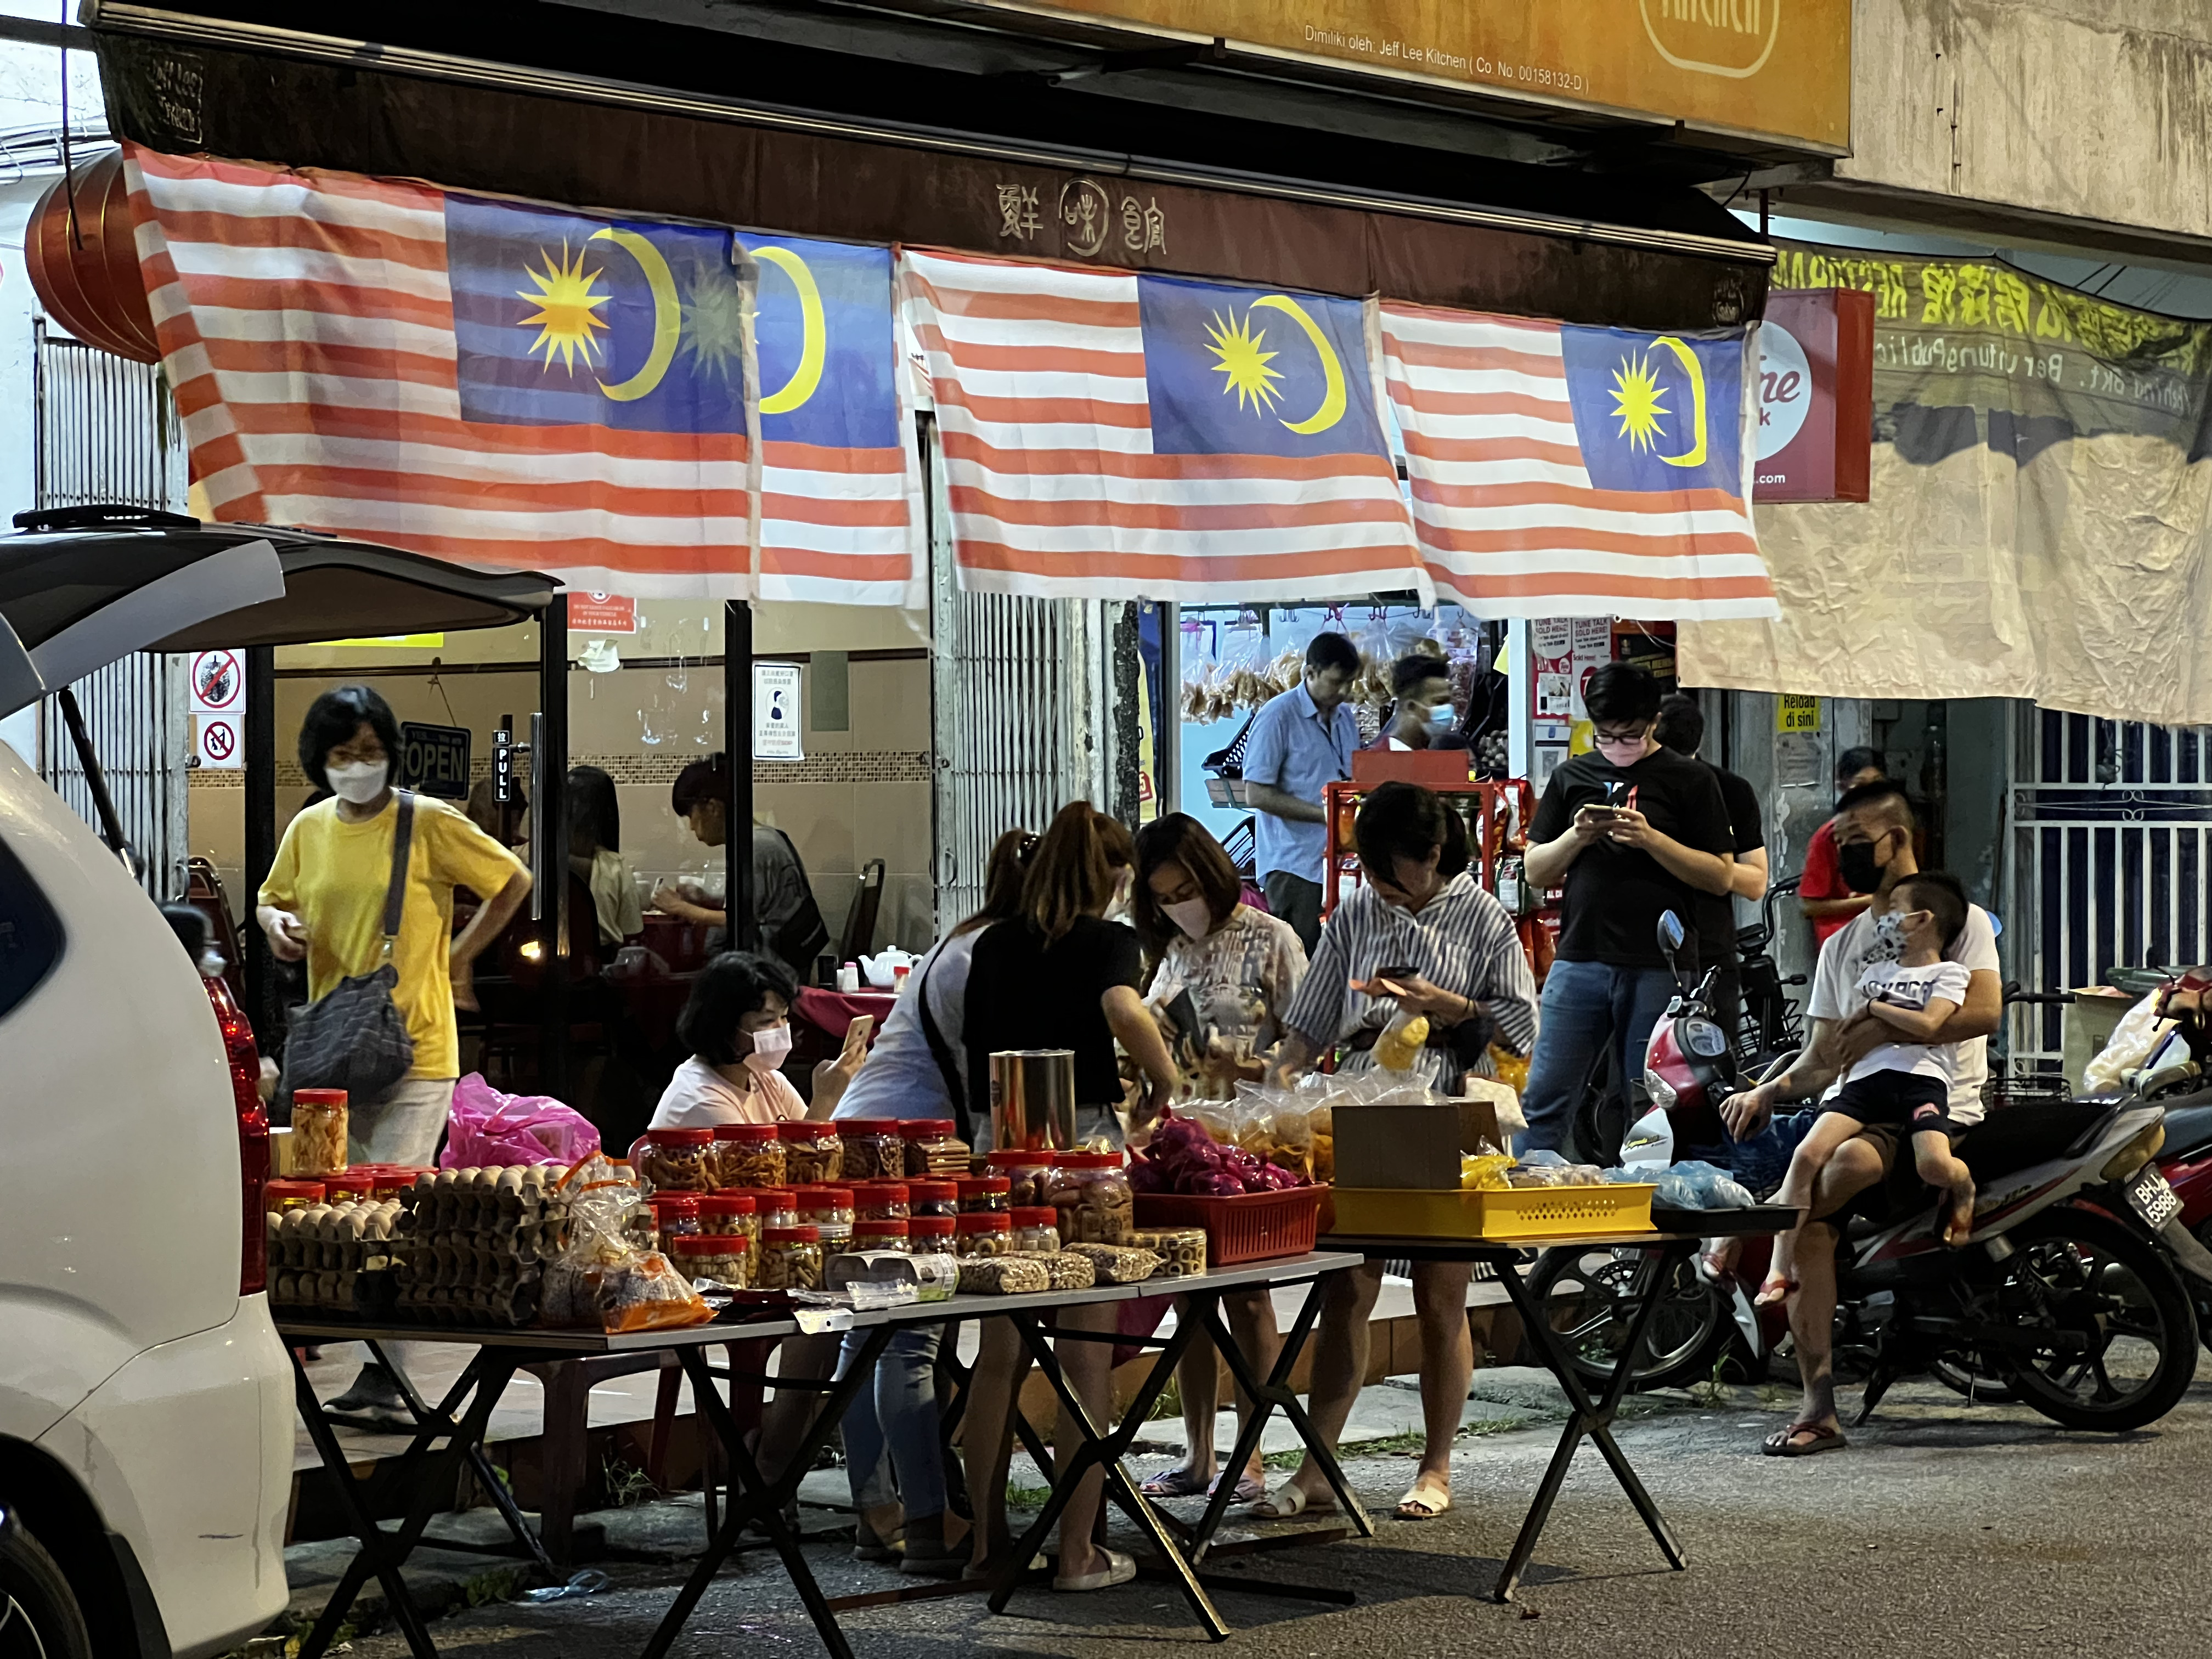 Sungai Buloh is more crowded than usual the night before elections.